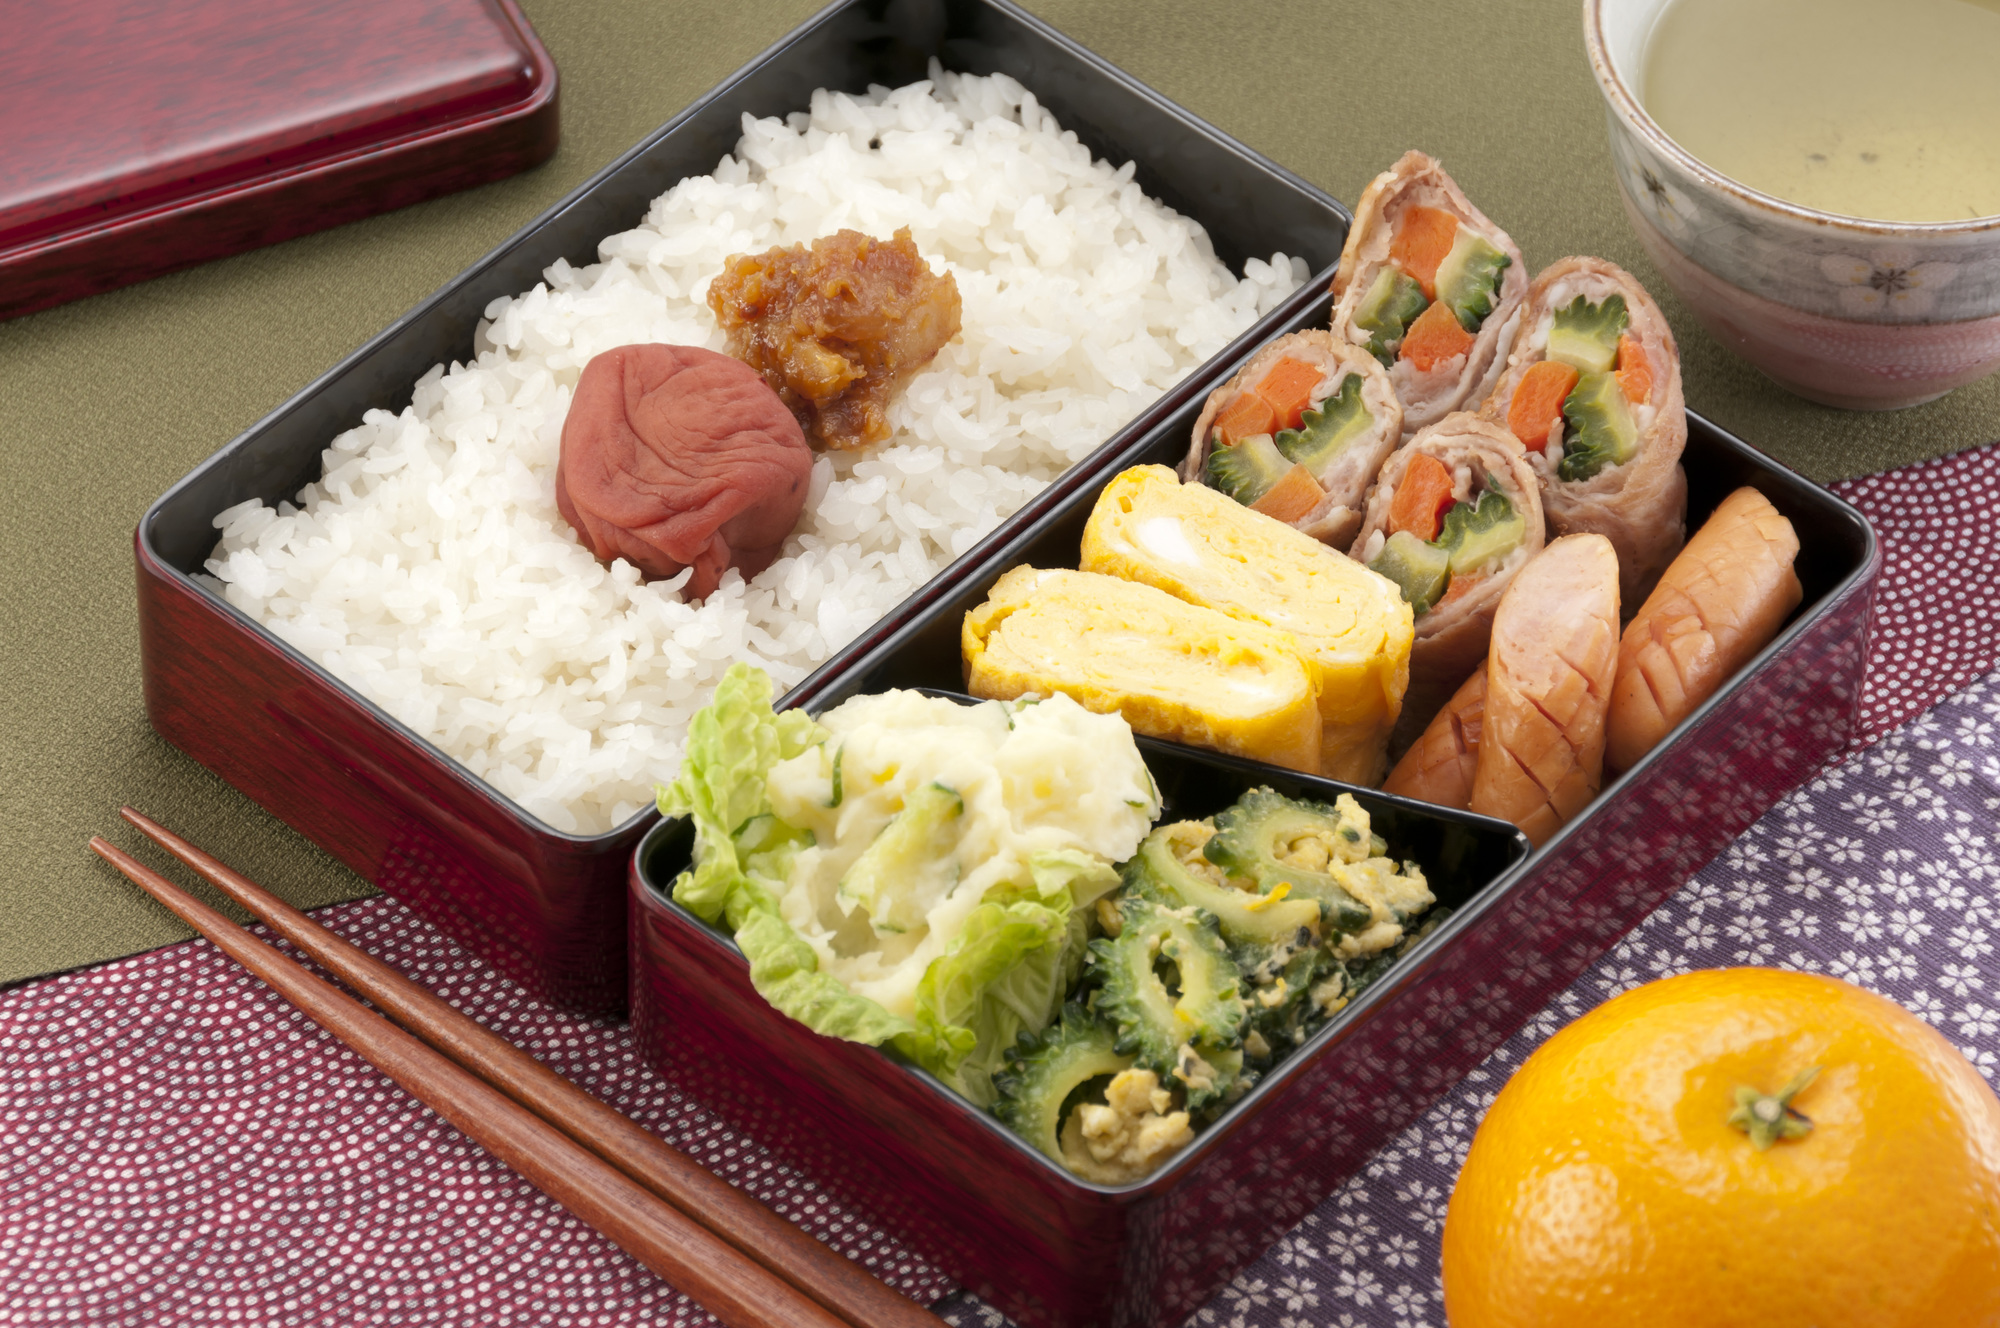 Bento, a look inside the Japanese lunchbox